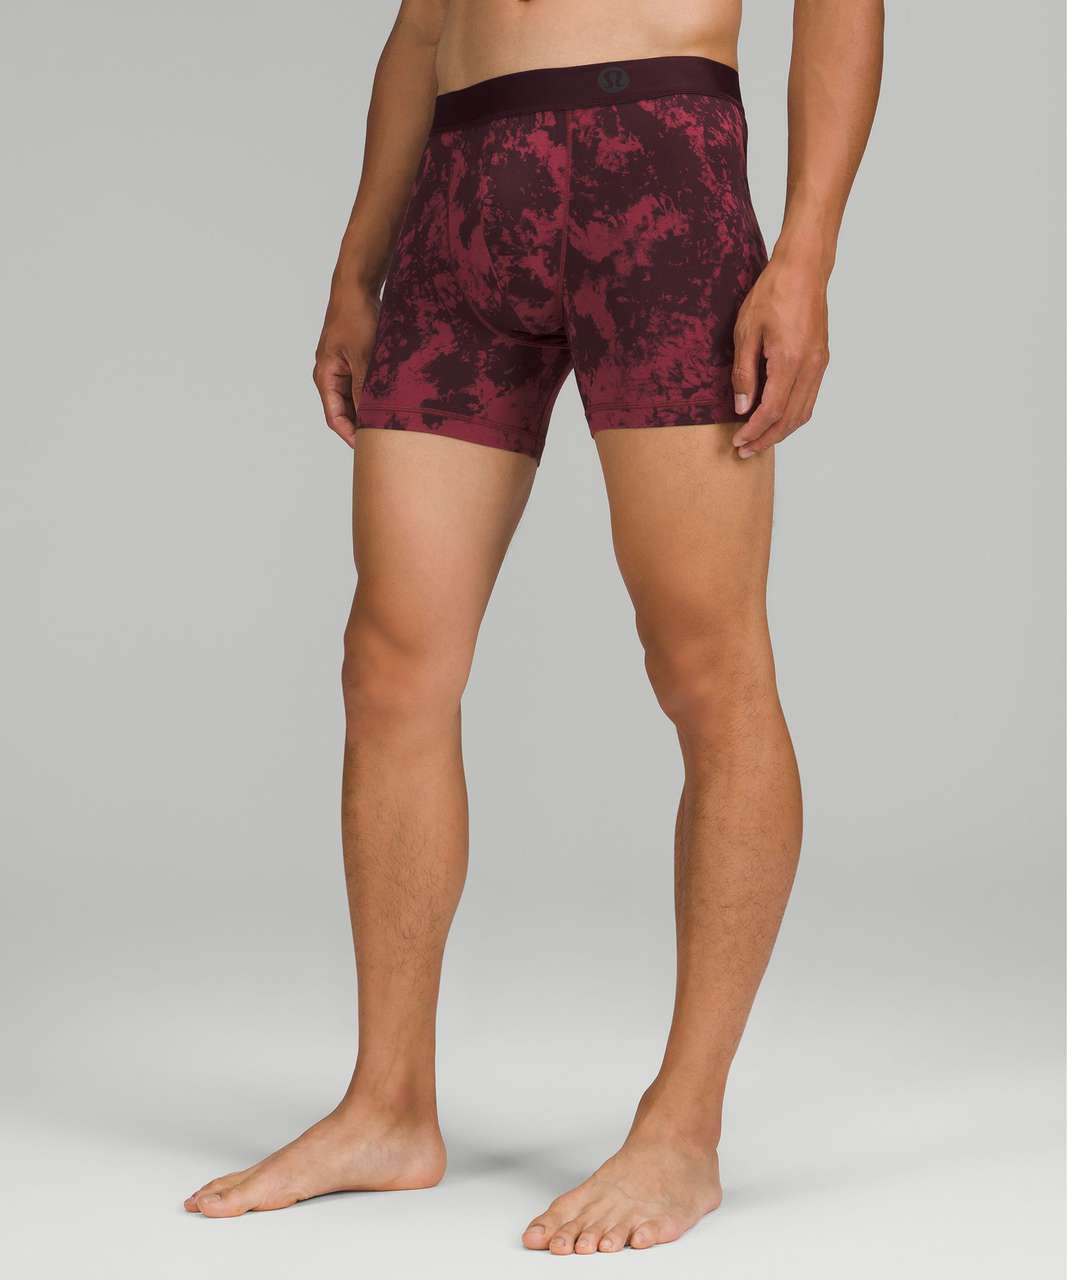 Lululemon Always In Motion Boxer 5" *3 Pack - Date Brown / Obsidian / Spectral Mulled Wine Cassis